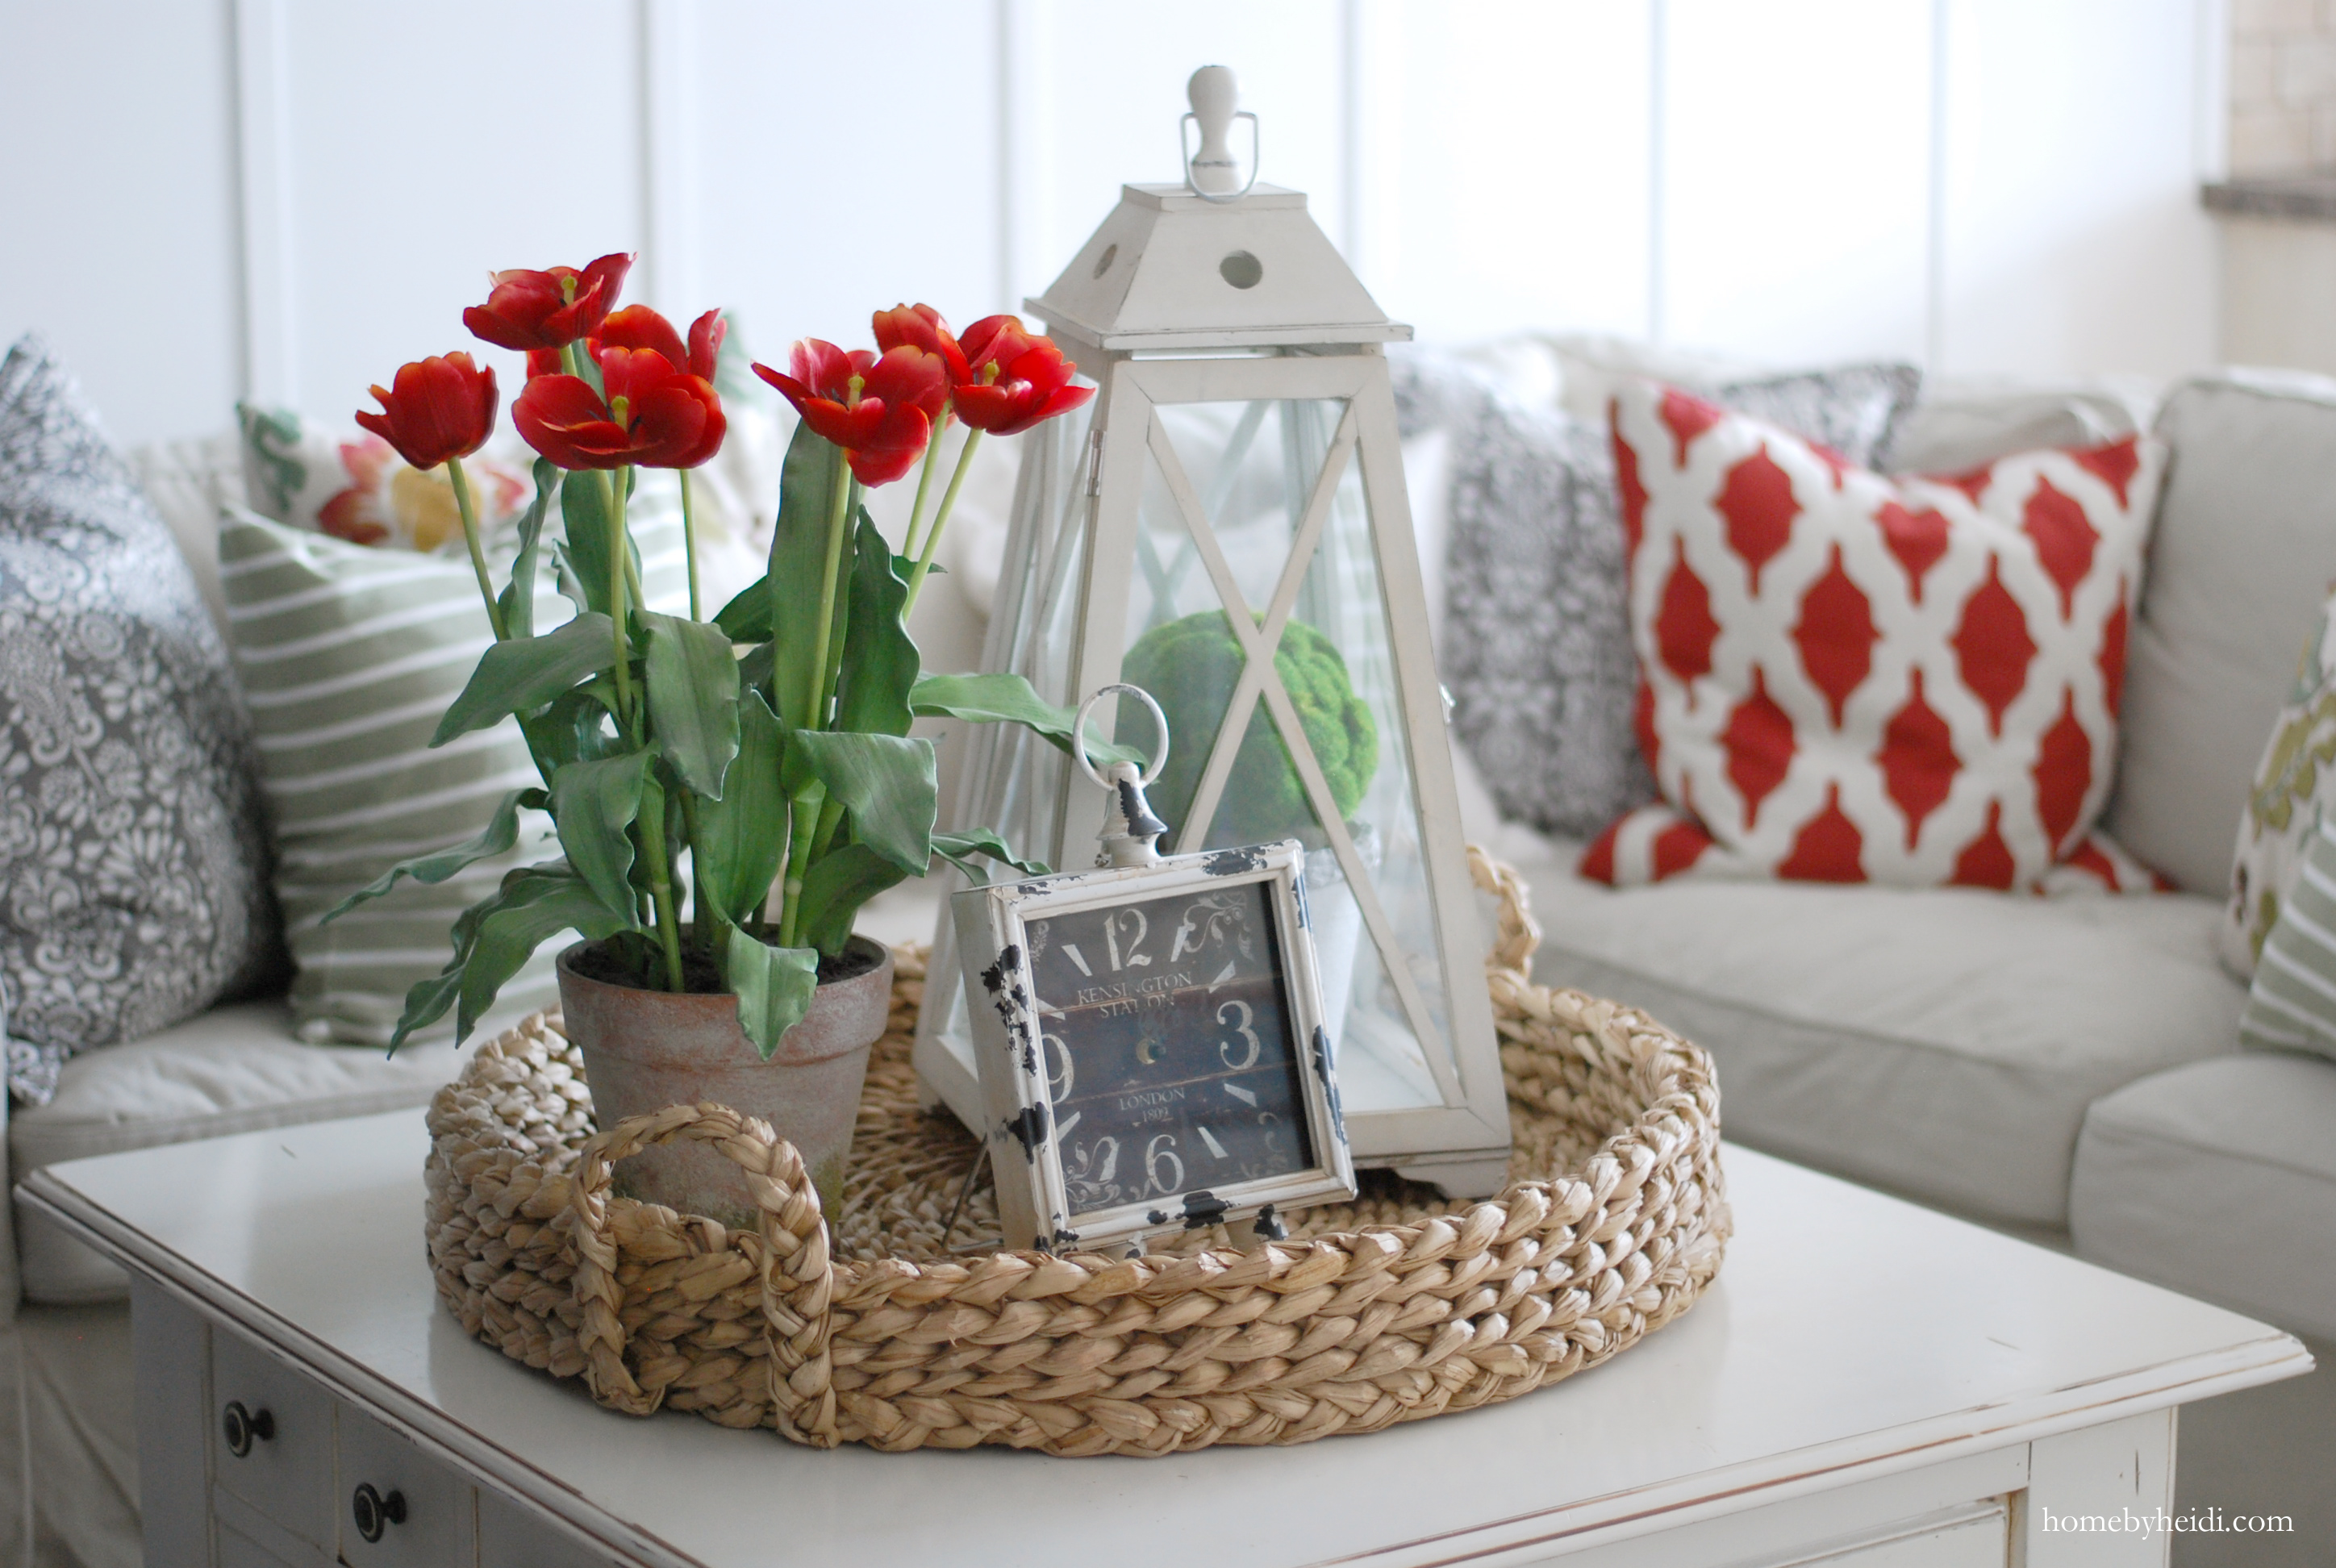 Decorating With Red - The Crafting Chicks